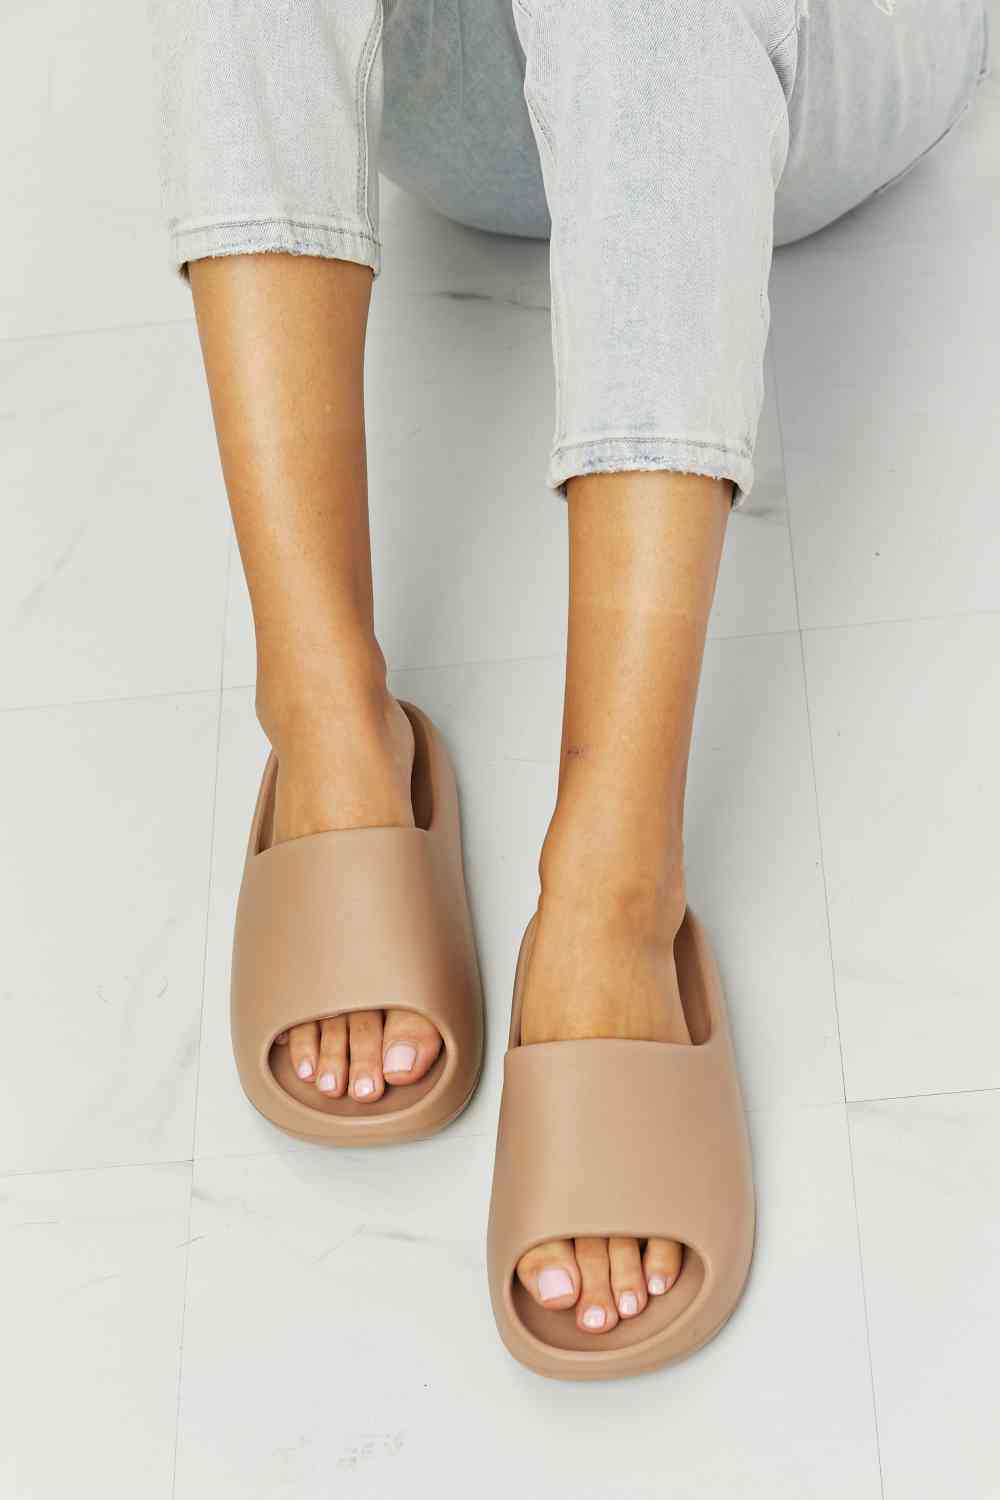 Light Gray NOOK JOI In My Comfort Zone Slides in Beige Sentient Beauty Fashions Shoes